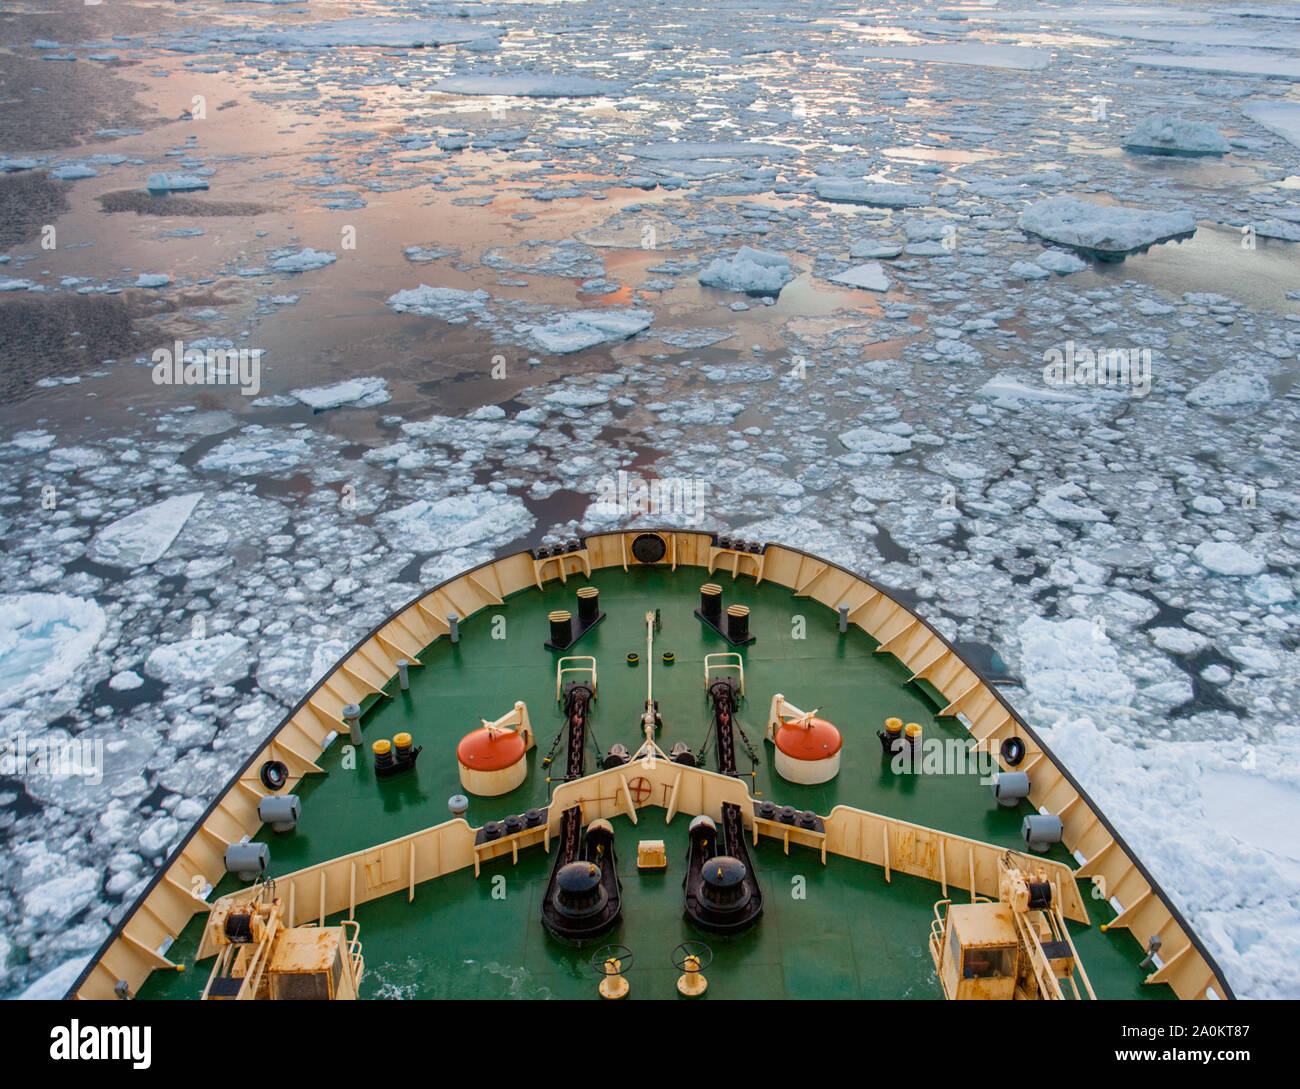 Prow of the Icebreaker Kapitan Khlebnikov cutting through sea ice and floes en route to the Weddell Sea, Antarctica Stock Photo